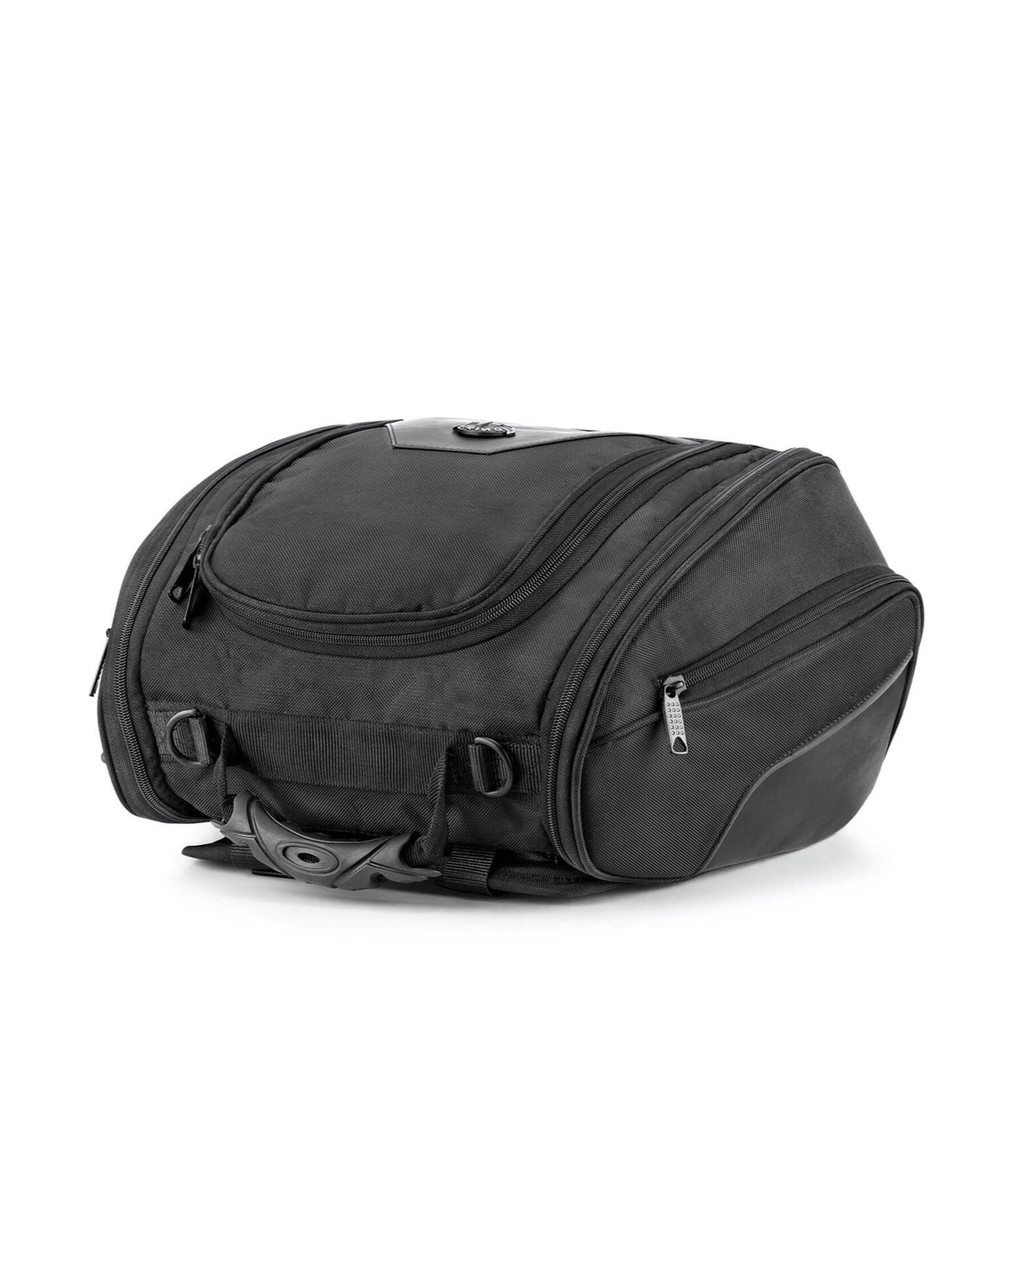 5 Best Motorcycle Tank Bags For the Rugged Explorer